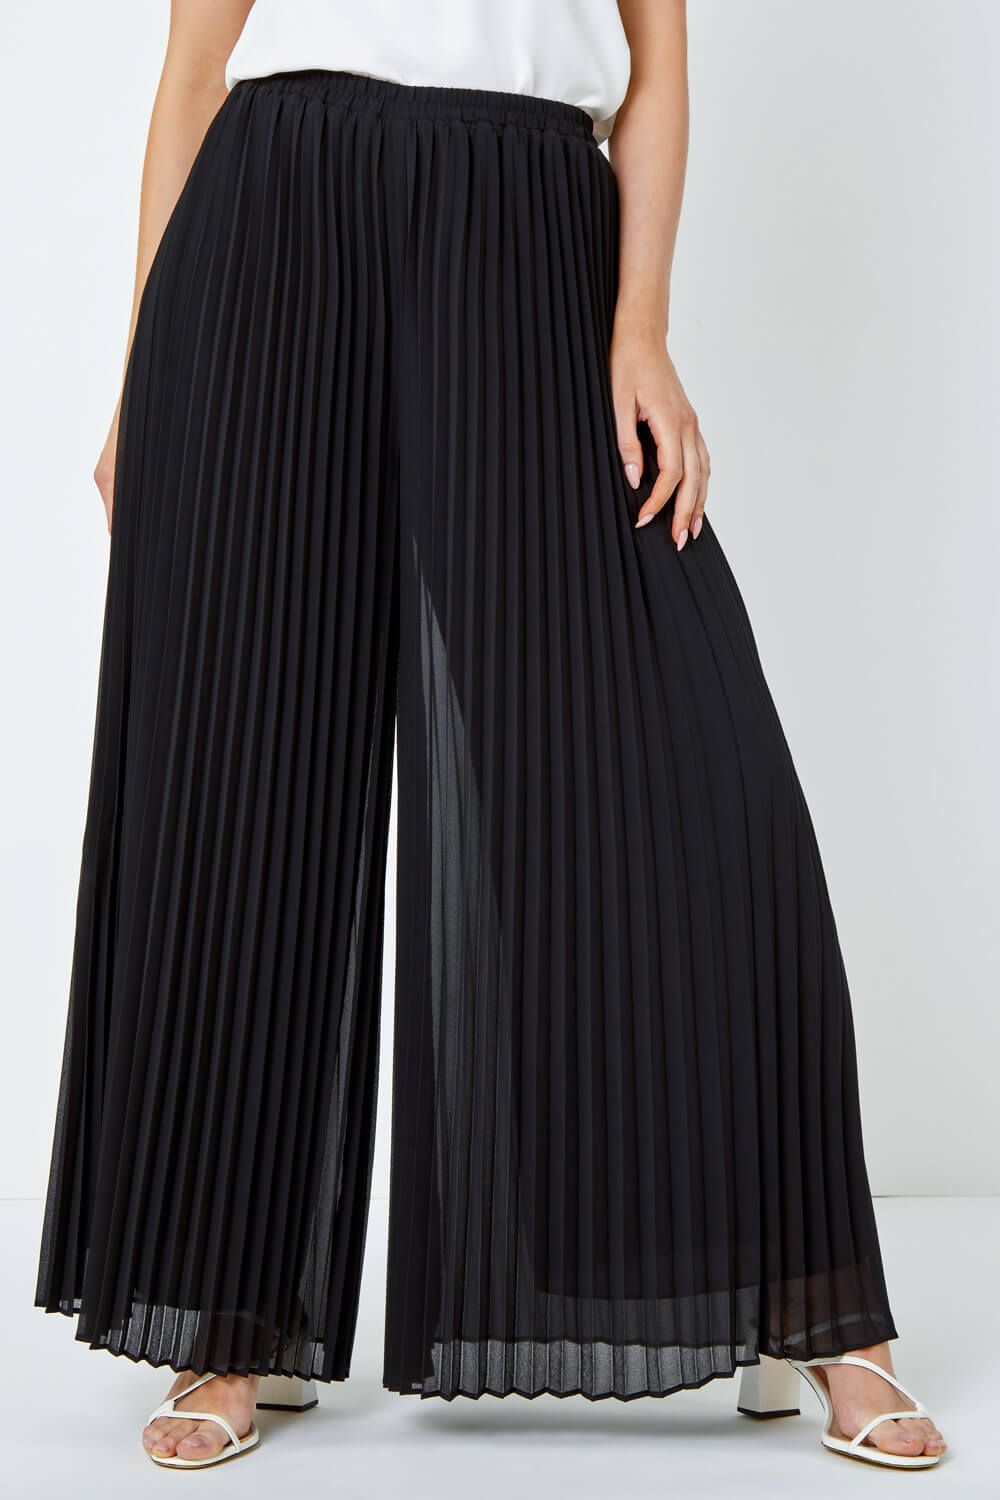 Black Pleated Wide Leg Trousers, Image 5 of 5